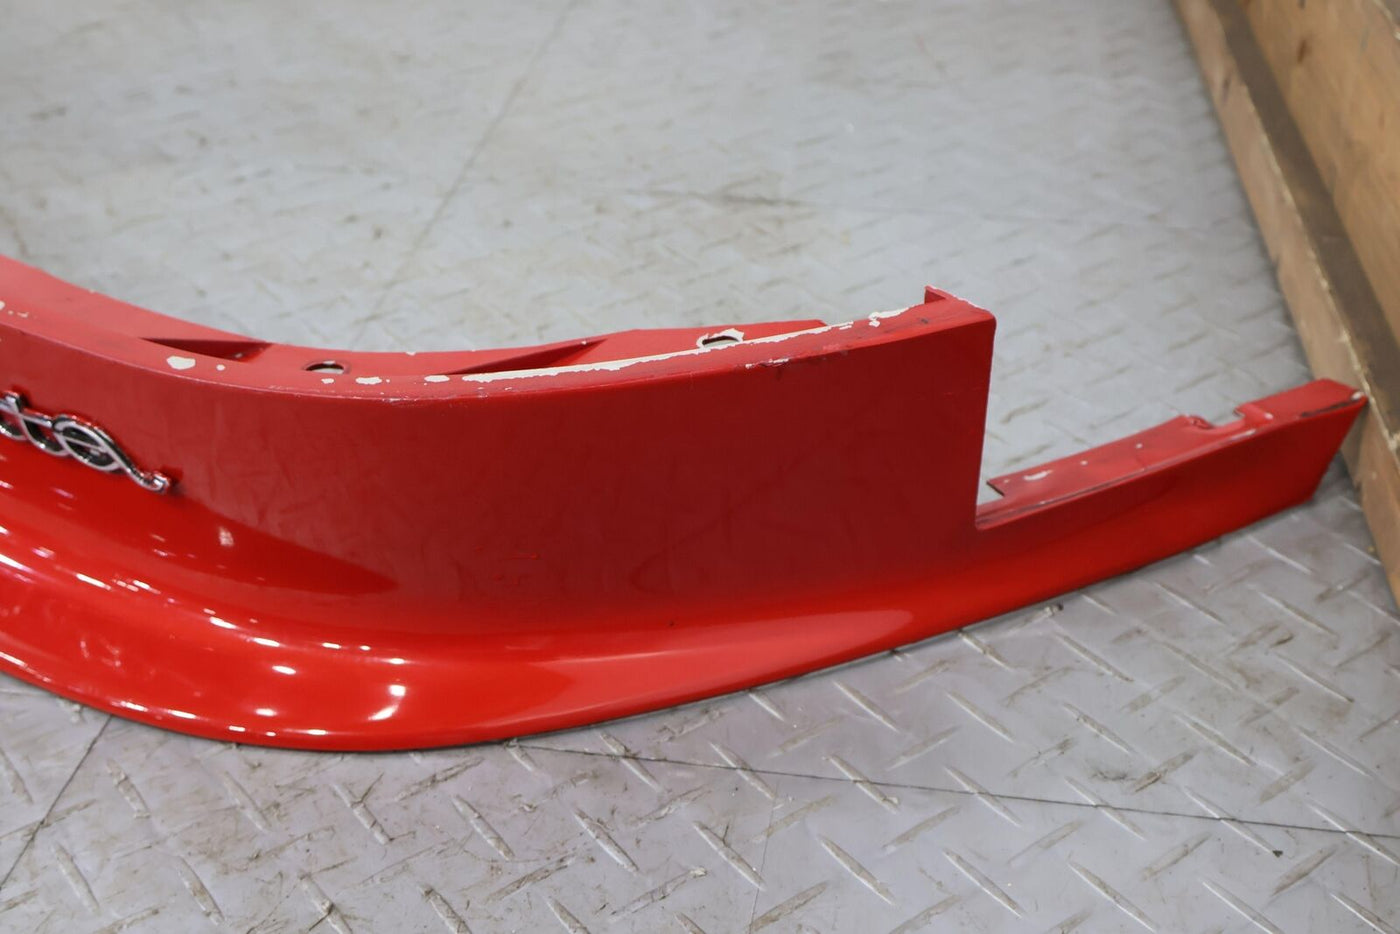 1990 Buick Reatta Rear Tail Finish Panel (Bright Red 66i) Resprayed (Blemishes)